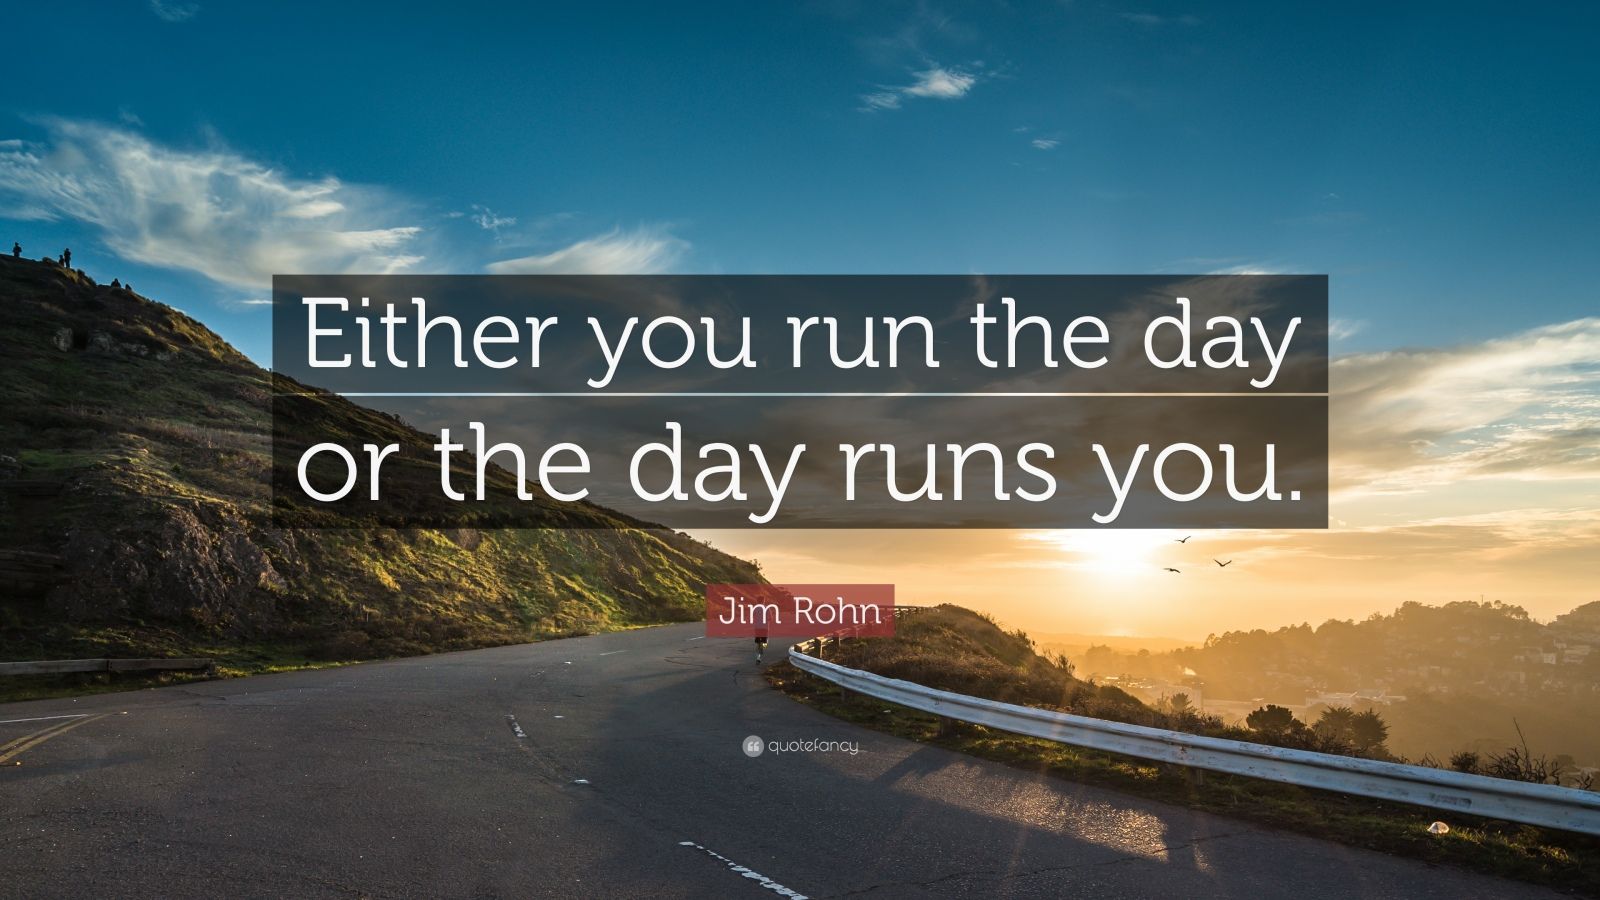 Jim Rohn Quote: “Either you run the day or the day runs you.”